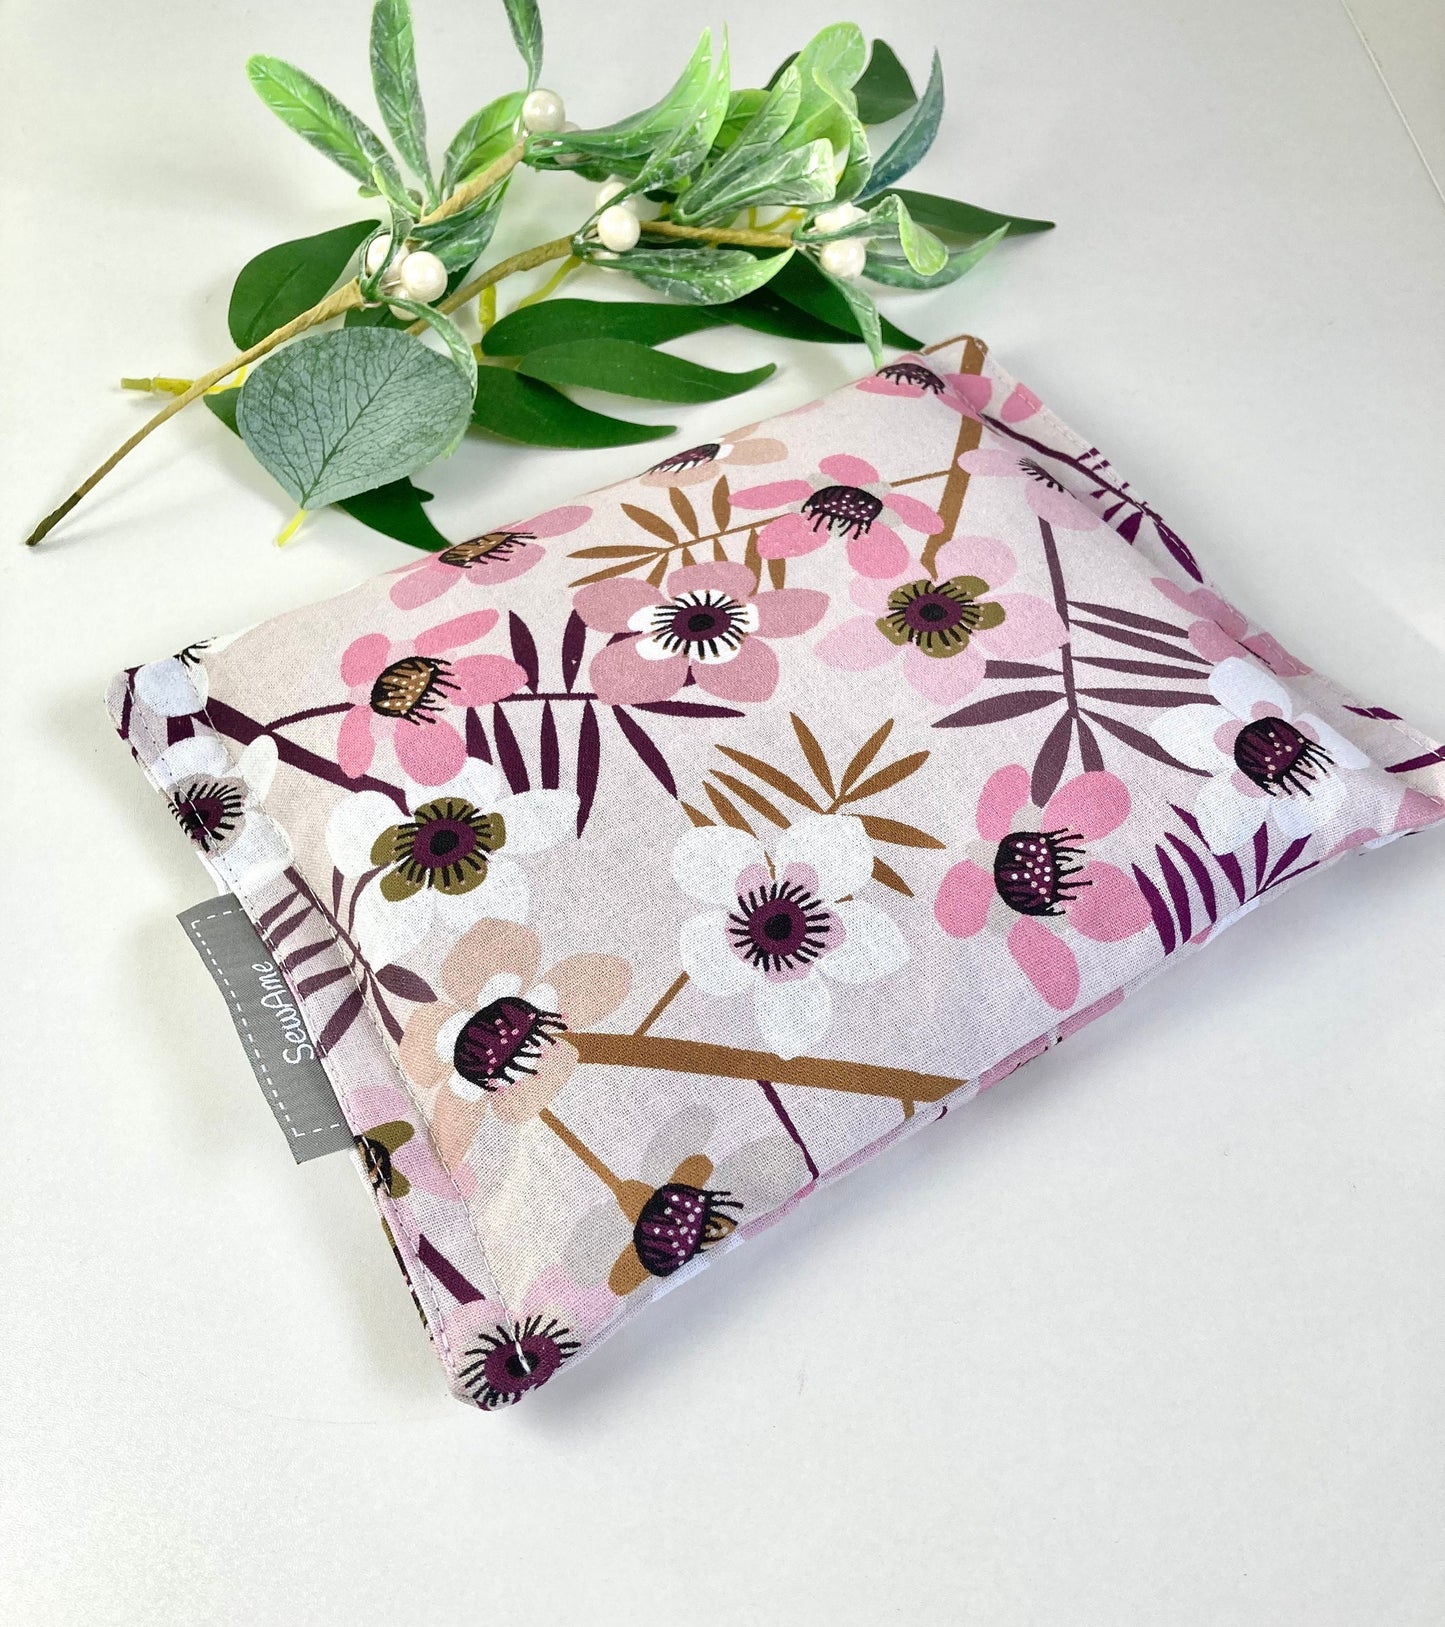 Christmas Eve Box for Mum, Beauty Pamper Gift Box Set, Spa and Care Pack in Pink Blossom Fabric, Handmade Organic Soap